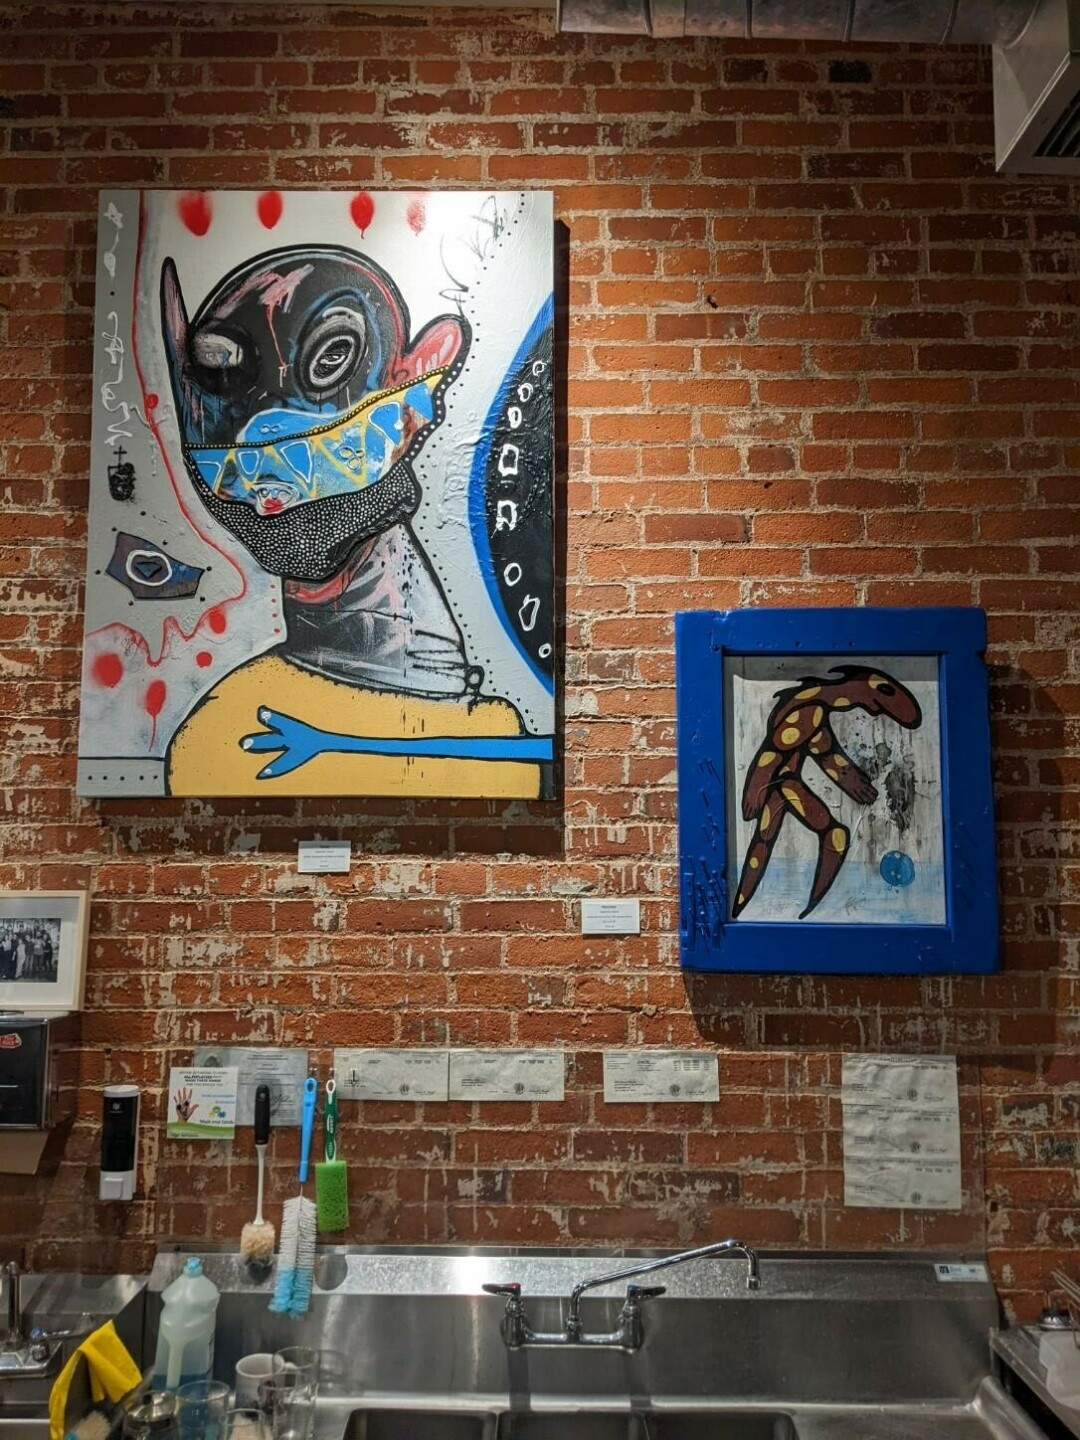 COFFEE WITH A SIDE OF ART? Sign me up! ArtFly has begun curating local art pieces in SHIFT Cyclery and Coffee Bar. (Submitted Photos)